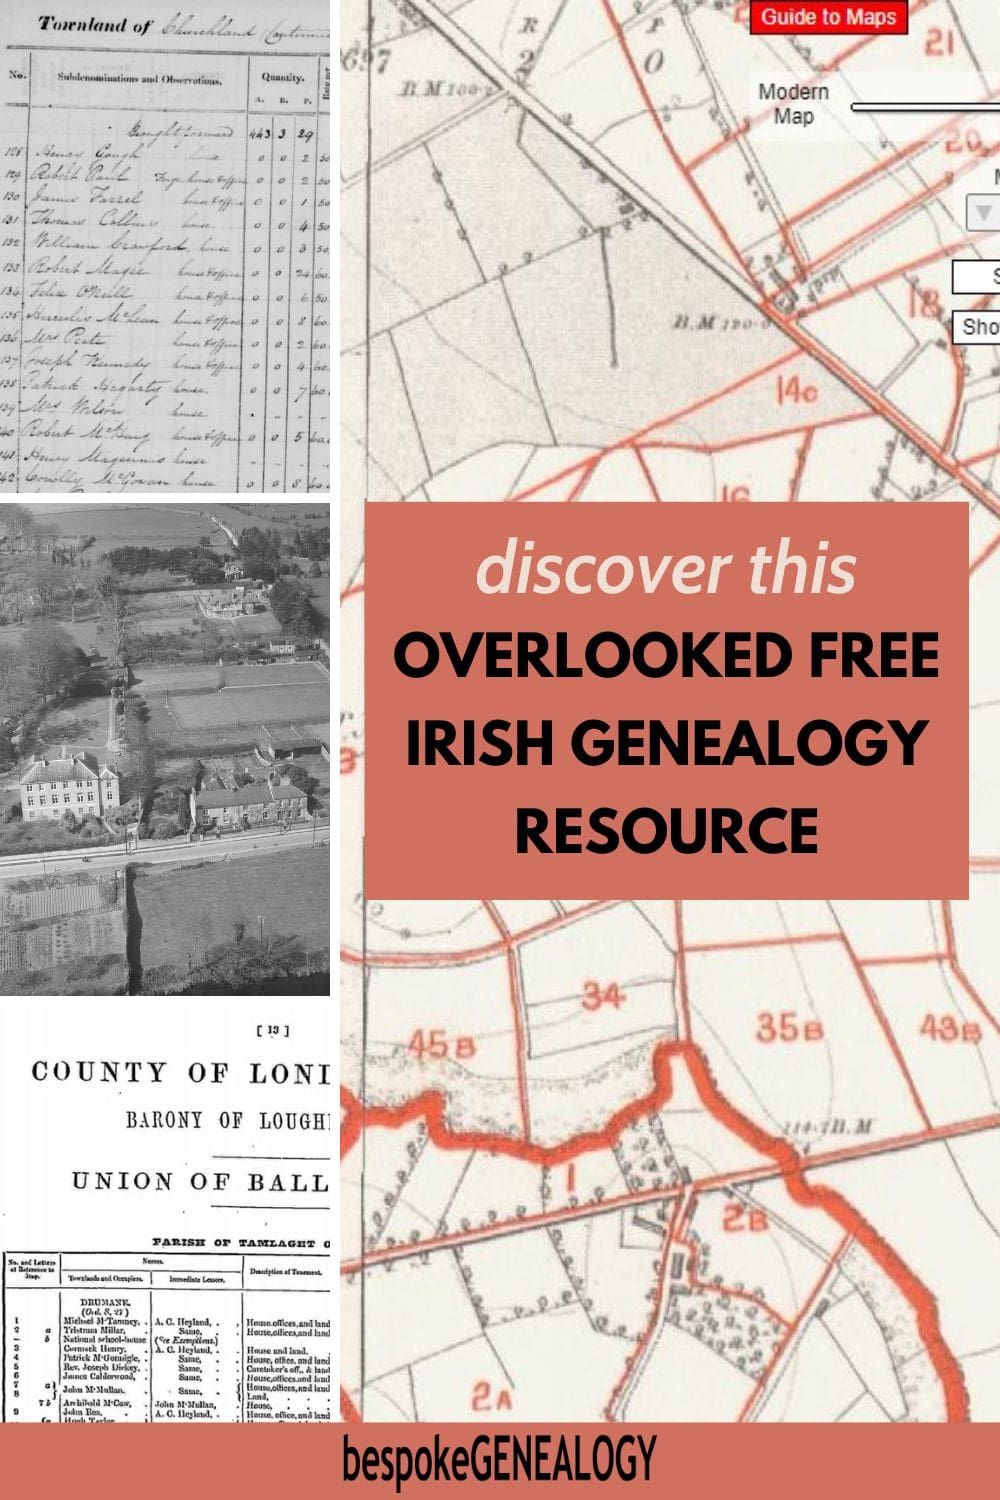 Discover this overlooked free Irish genealogy resource. 4 pictures: a map extract, a printed page extract, a handwritten notebook extract and an aerial photo of a farm.